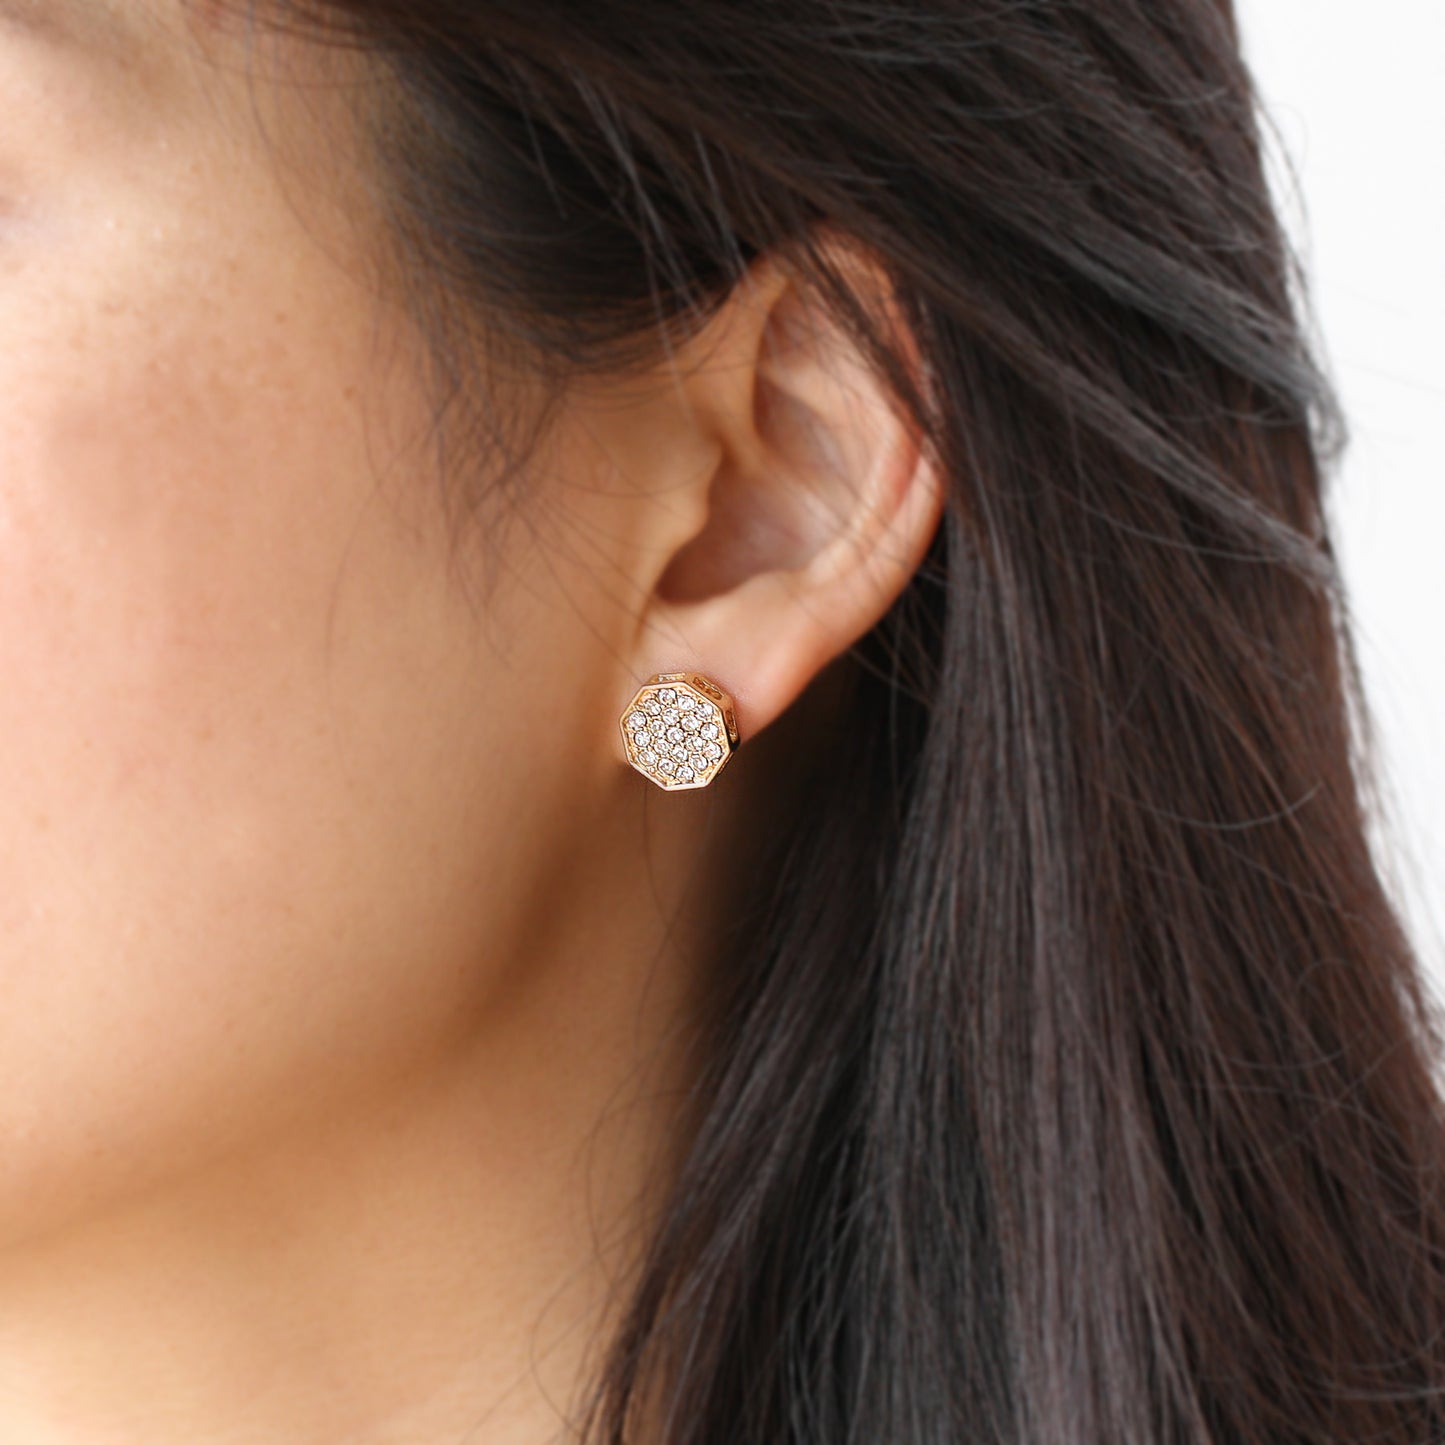 Pave CZ Octagon Earrings - 14K Gold Filled